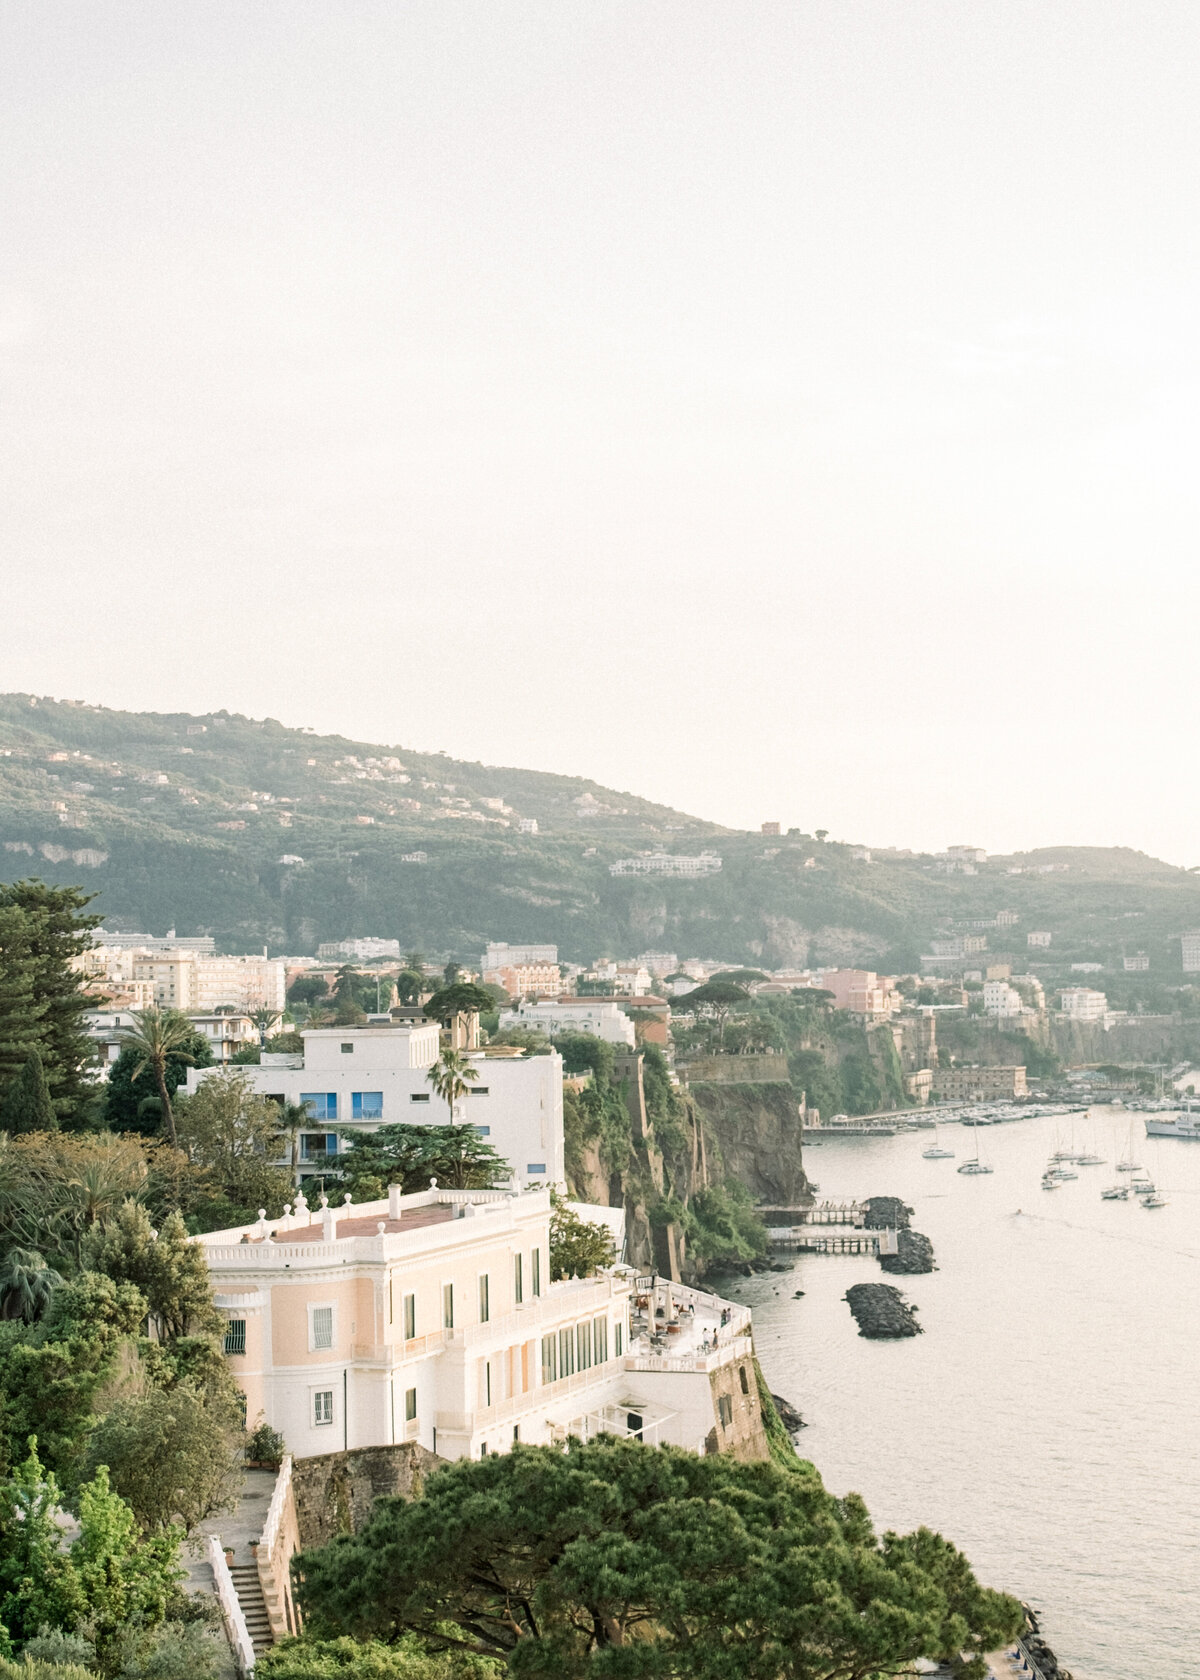 View from a wedding venue in sorrento italy taken by destination photographer Margaret Elizabeth photography